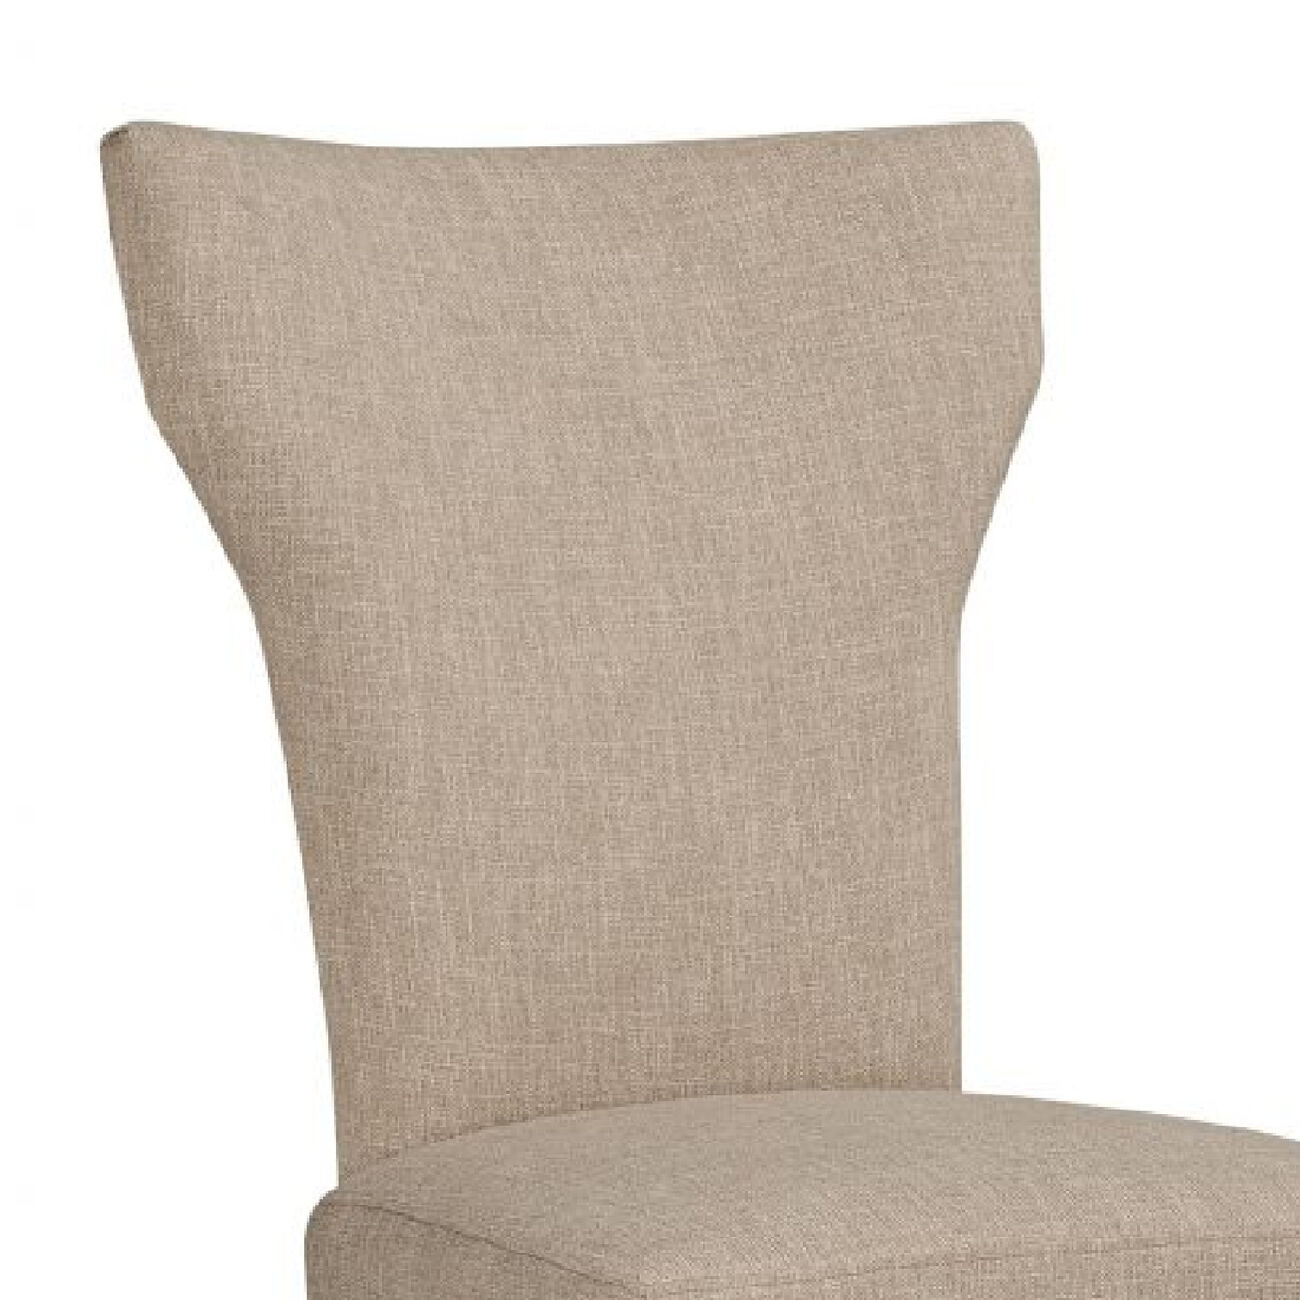 Fabric Upholstered Side Chair with Wingback Design, Set of 2, Oatmeal Brown